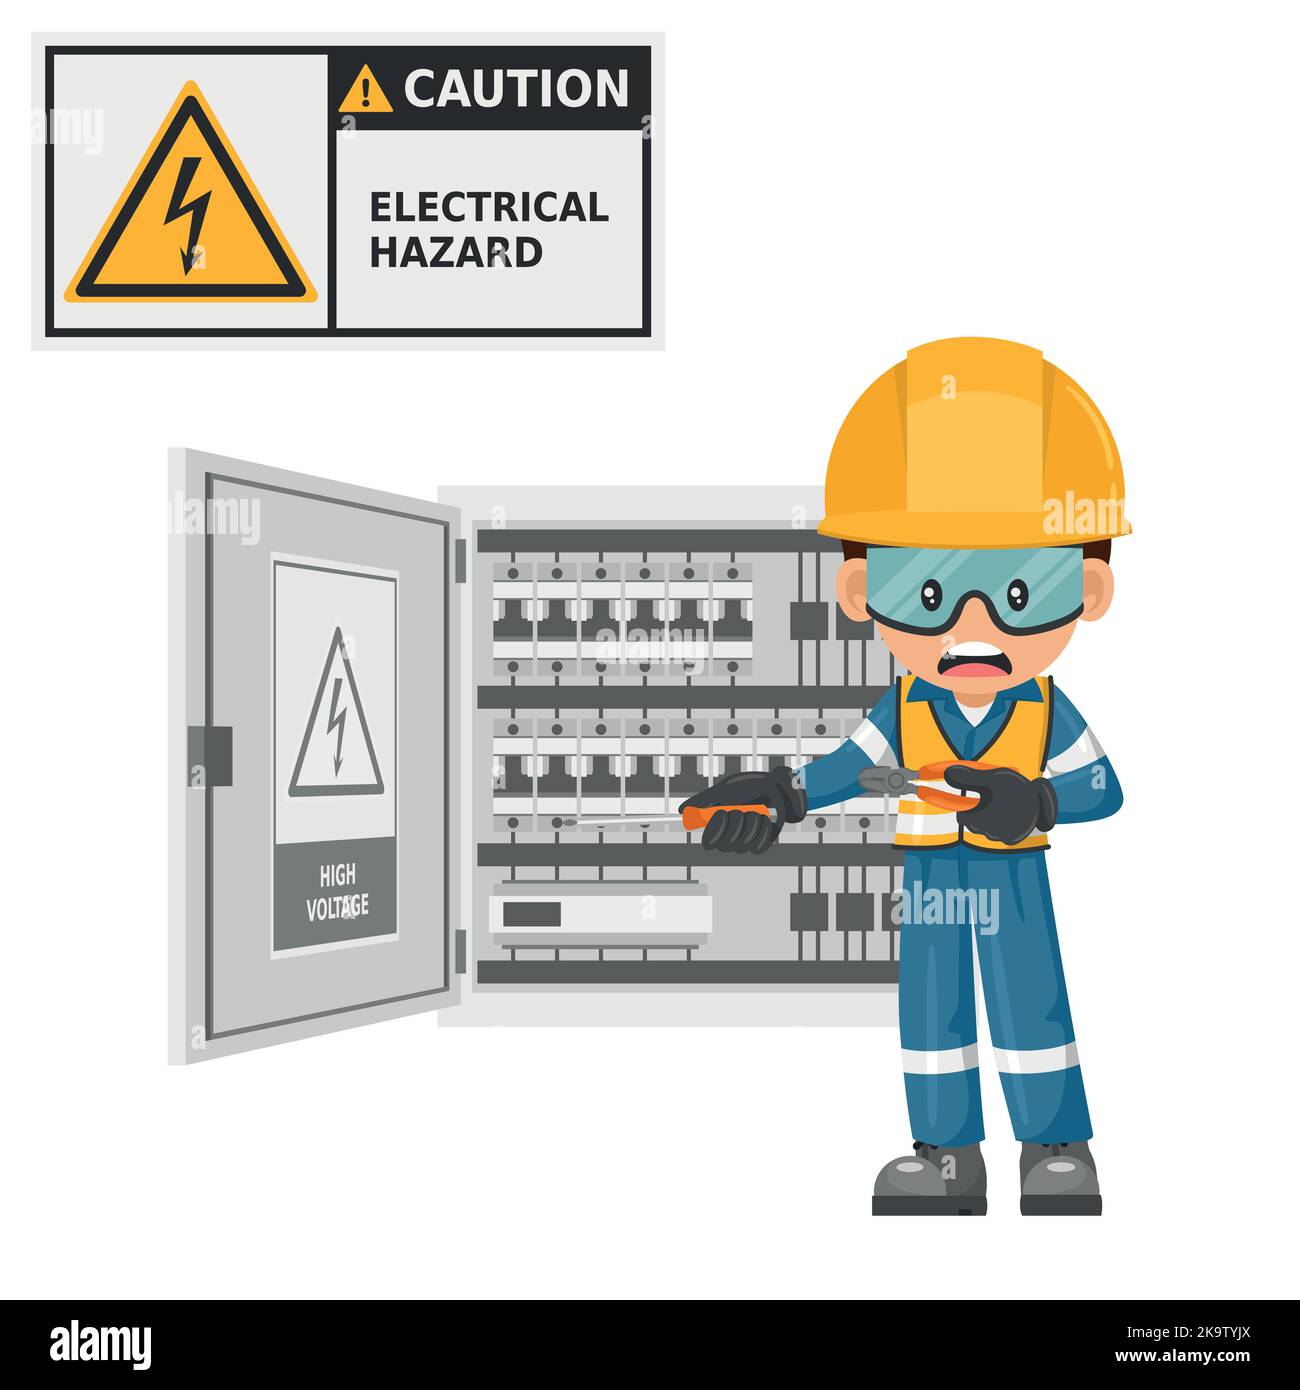 Caution, electrical hazard. Industrial electrician worker manipulating electrical box or high voltage electrical switch panel. Security First. Industr Stock Vector